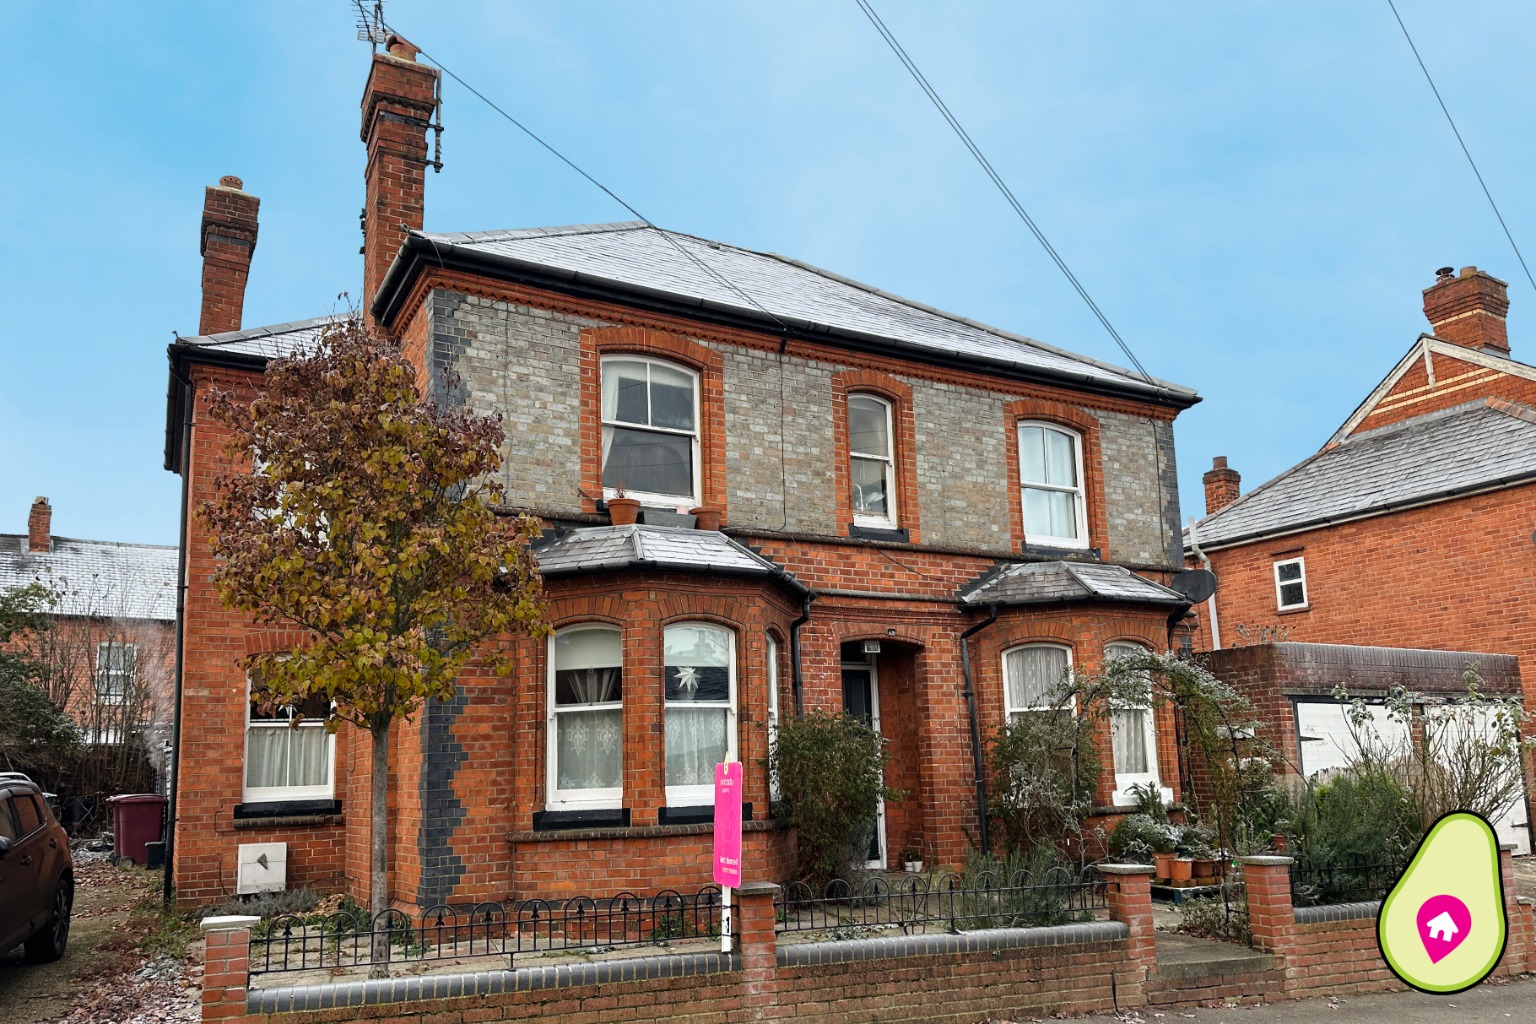 1 bed flat for sale in Eastern Avenue, Reading - Property Image 1